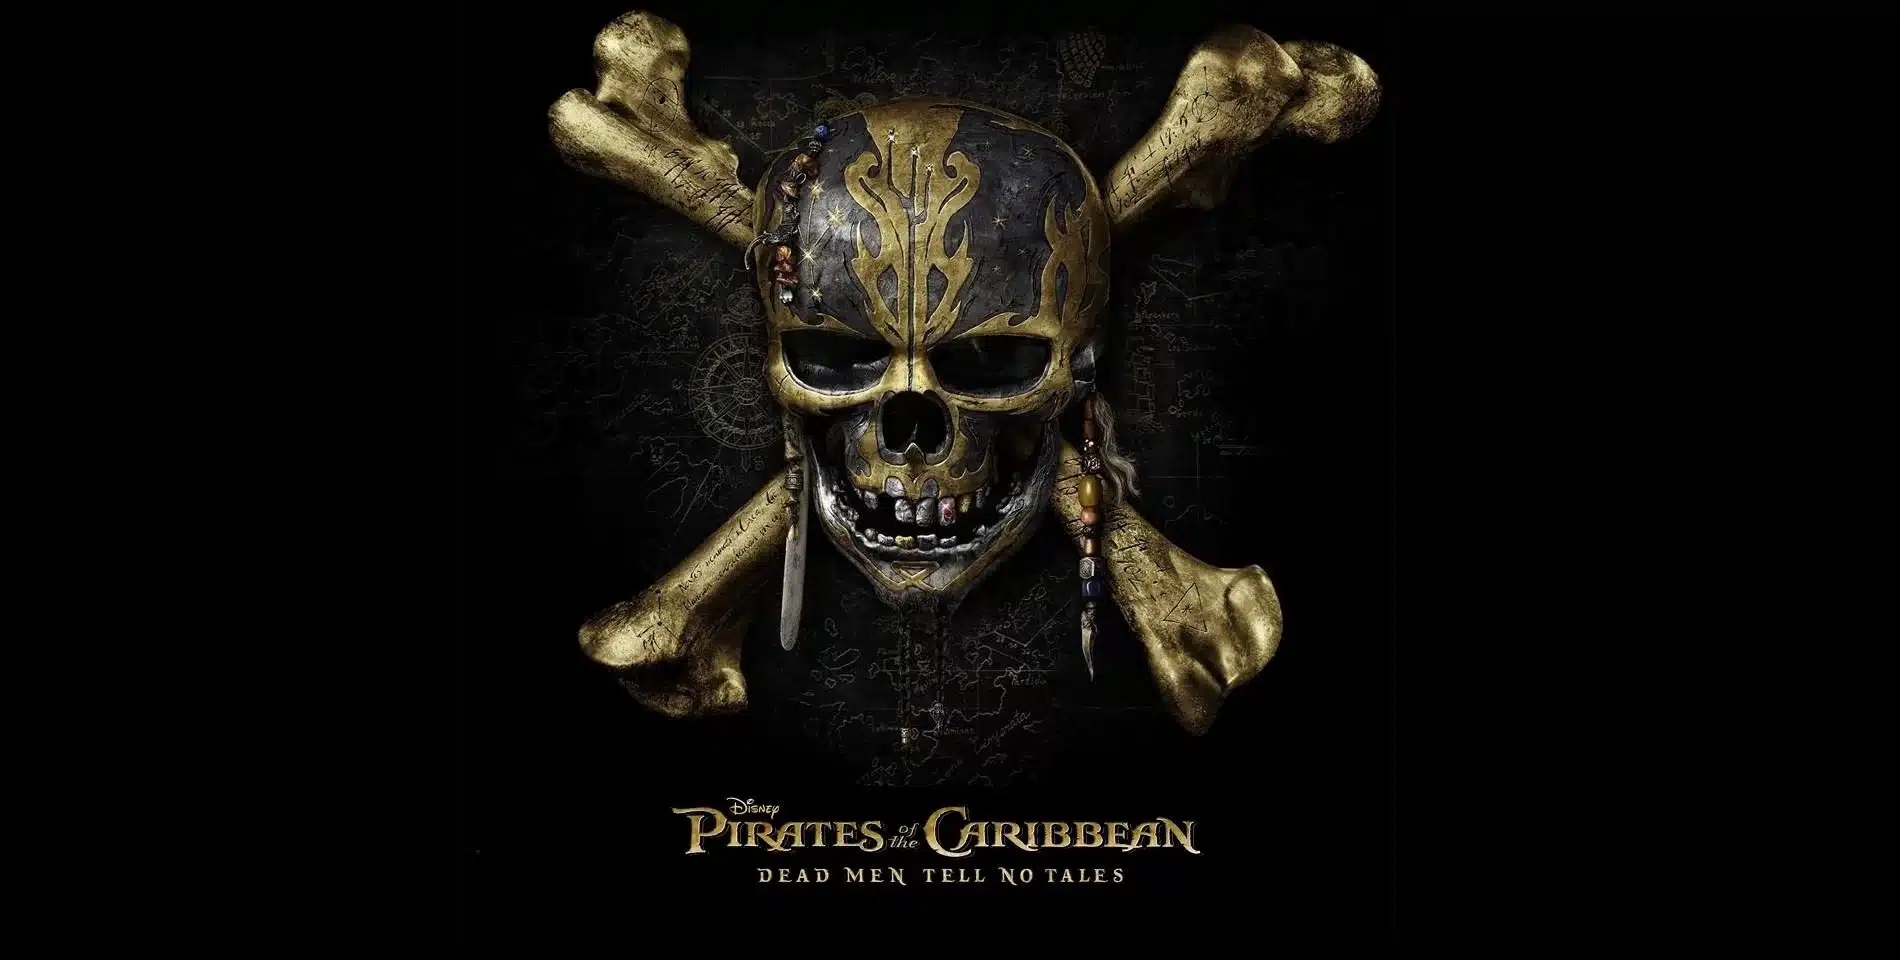 Pirates Of The Caribbean 5 Teaser Trailer Is Out & We Are Excited